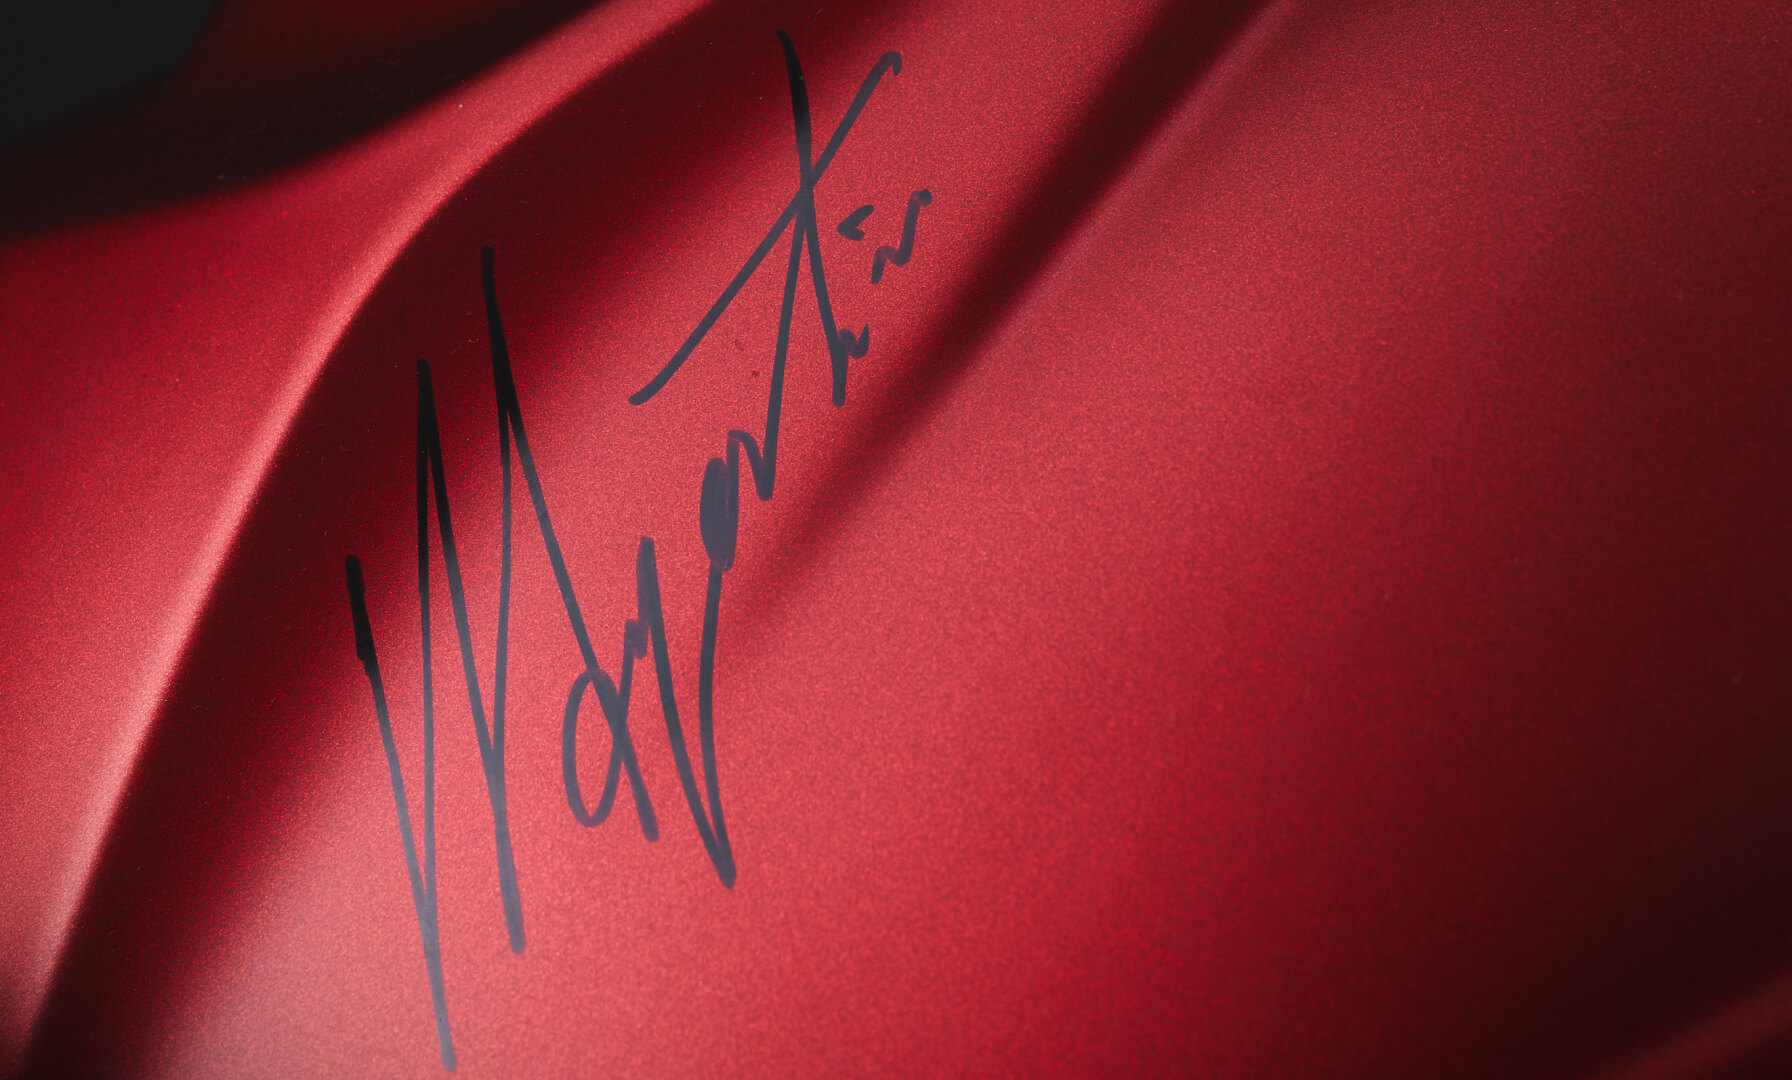 A view of Giacomo Agostini's signature on the new Special Edition Superveloce Ago created in commemoration of Giacomo Agostini